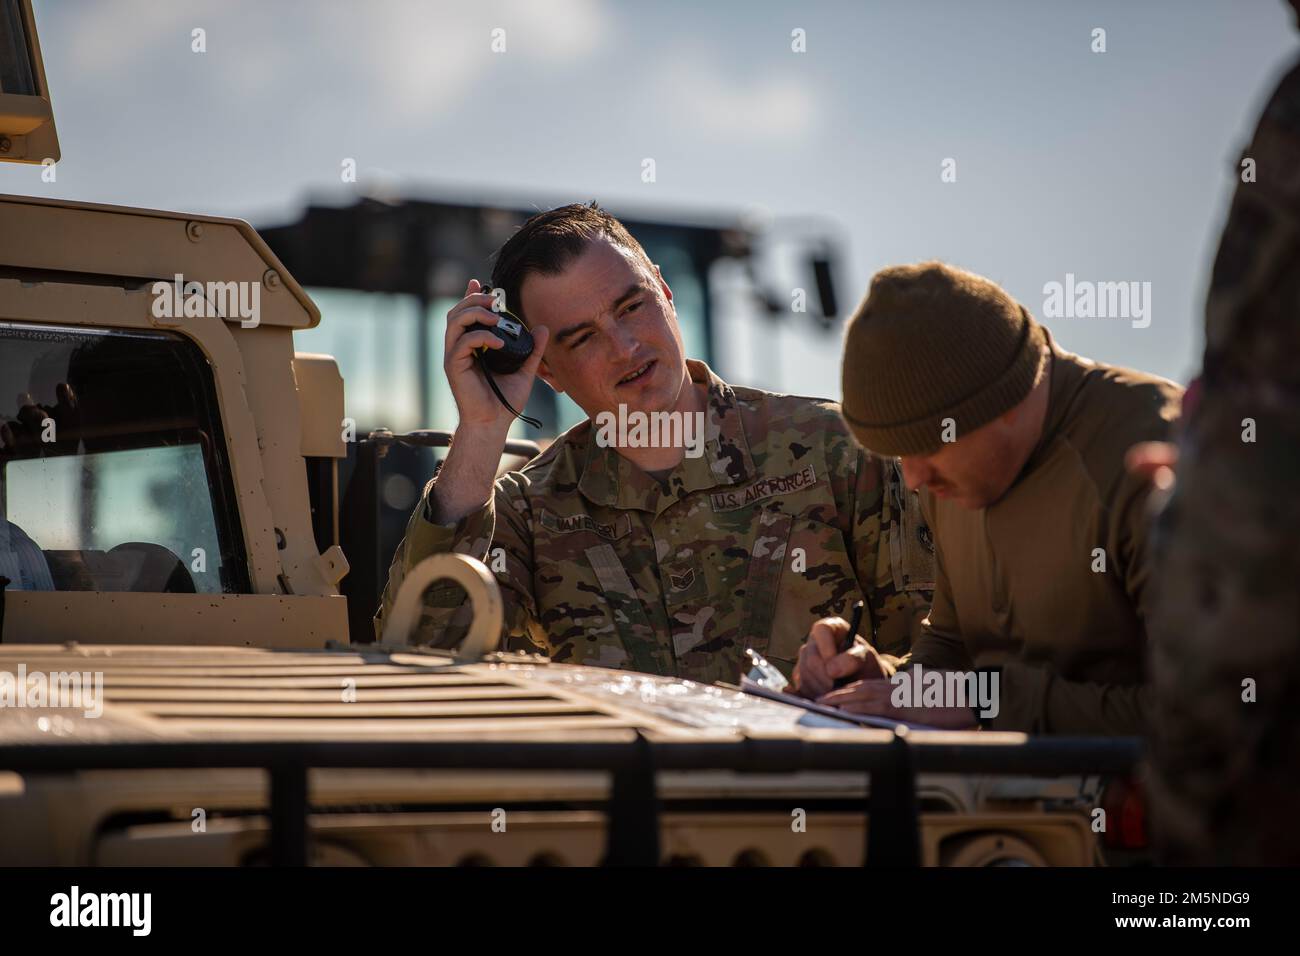 U.S. Air Force Tech. Sgt. Dominic Jones, right, and Staff Sgt. Tyler Van Every, both 60th Aerial Port Squadron joint inspectors, inspect cargo and equipment for an upcoming mission at Travis Air Force Base, California, March 29, 2022. U.S. forces deployed to multiple NATO nations to assure Allies and deter further aggression in the region. The 621st Contingency Response Wing is specialized in training and rapidly deploying personnel to quickly open airfields and establish, expand, sustain and coordinate air mobility operations. Stock Photo